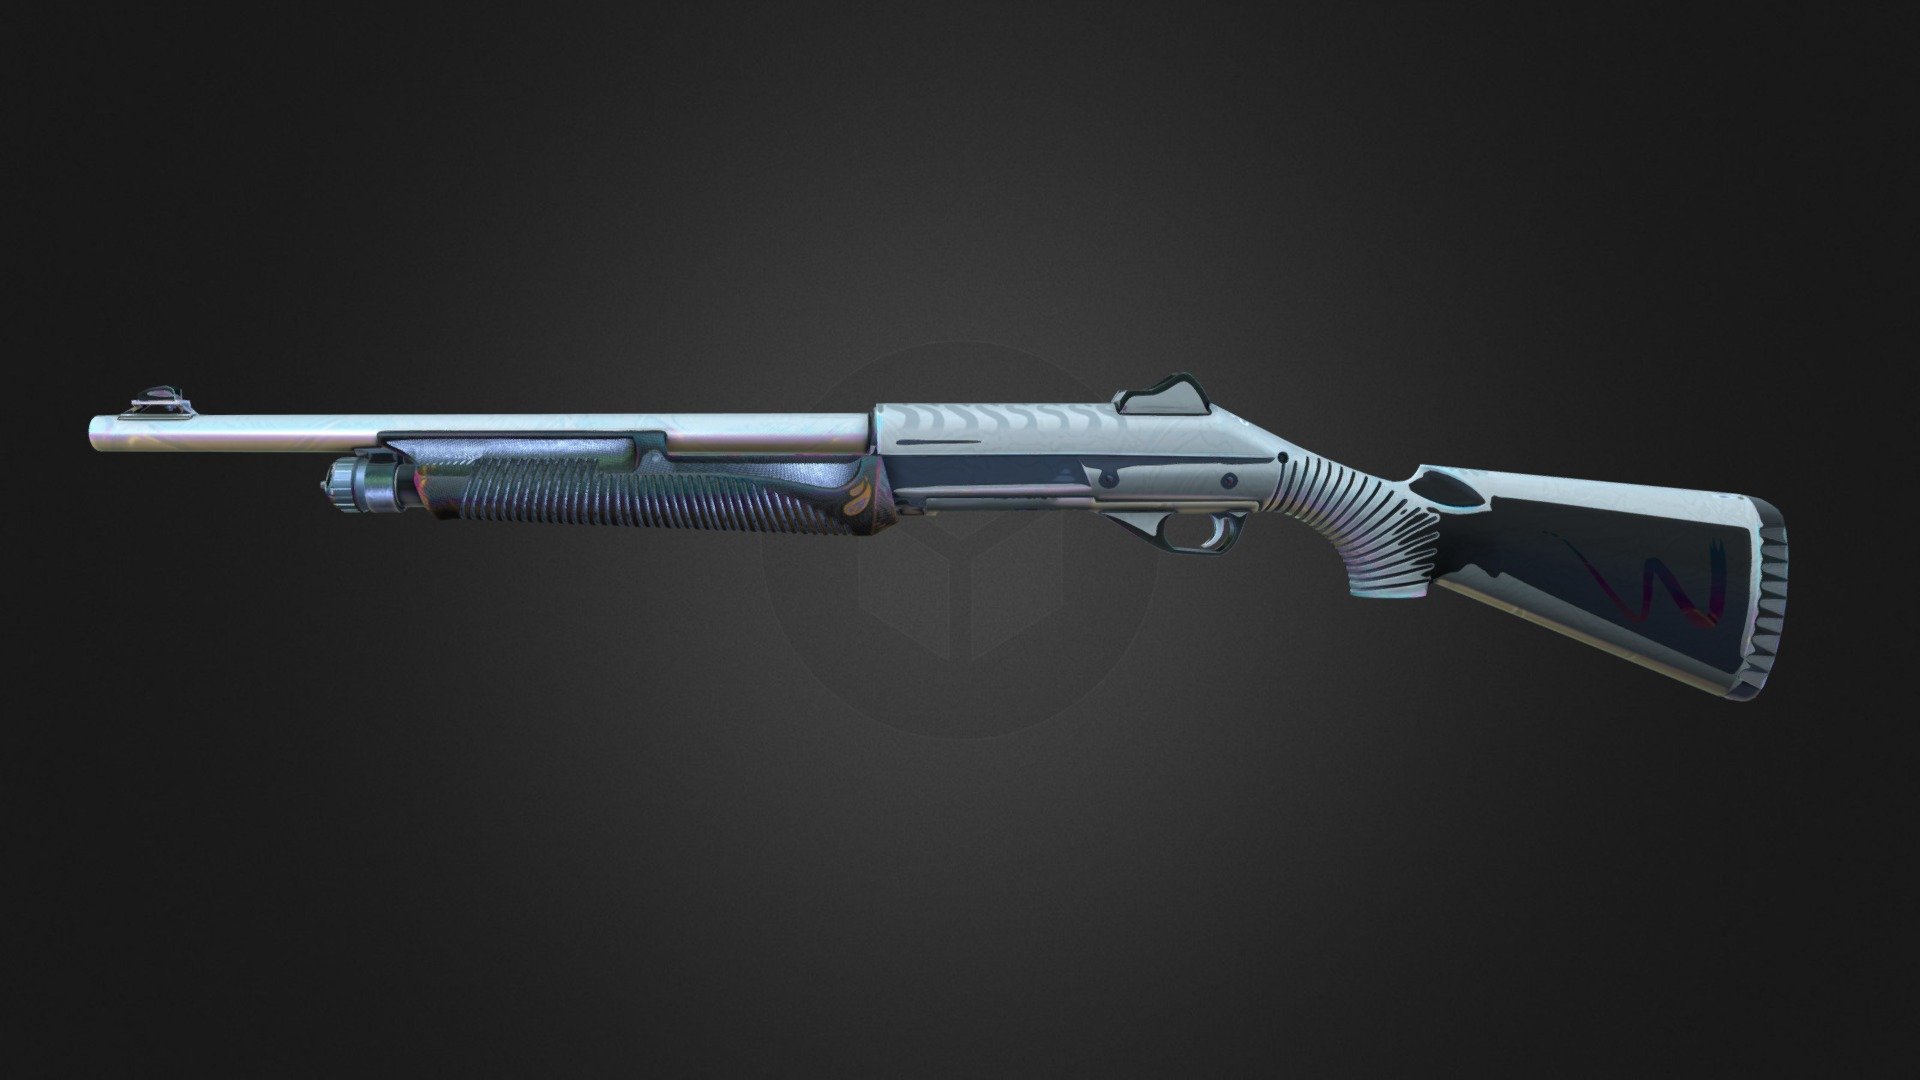 If you like this skin and want to see it in cs:go, please vote on it here: https://steamcommunity.com/sharedfiles/filedetails/?id=2339043986 - Nova | Lightwox - 3D model by Nordcrisp 3d model